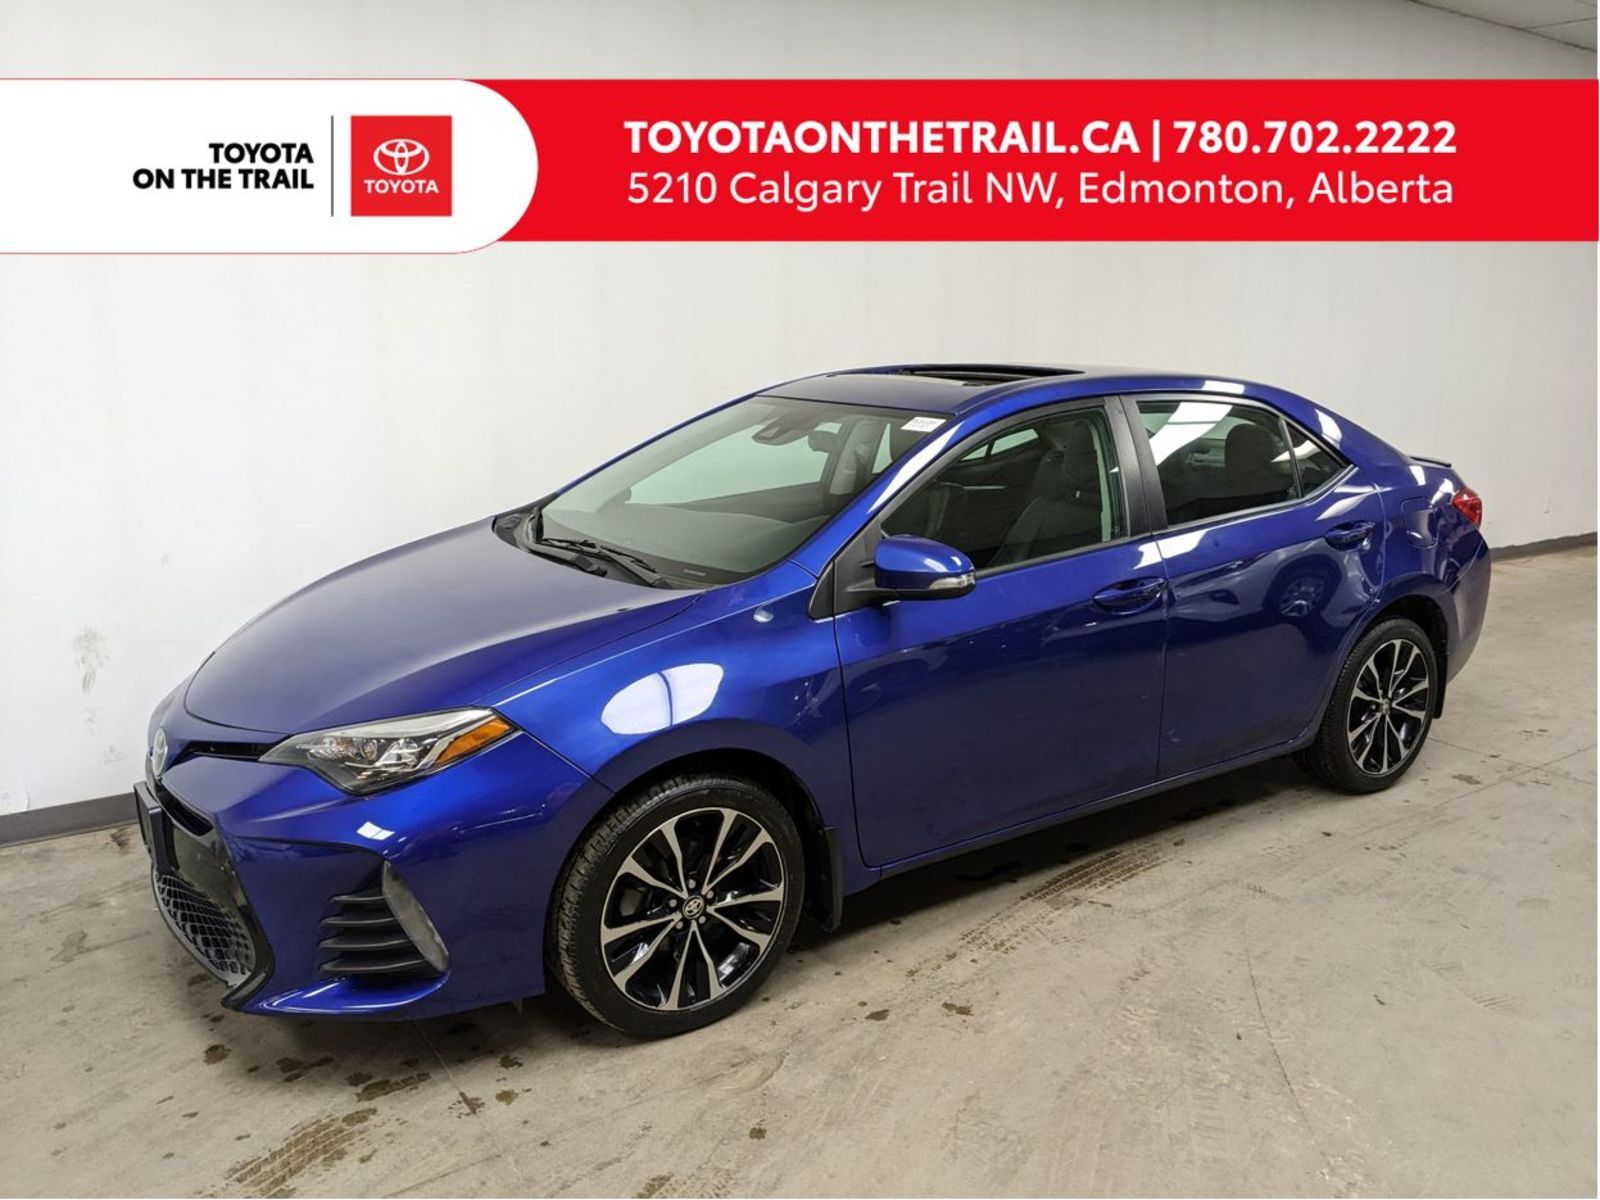 2019 Toyota Corolla SE UPGRADE PACKAGE; 6 SPEED MANUAL, SUNROOF, A/C, 